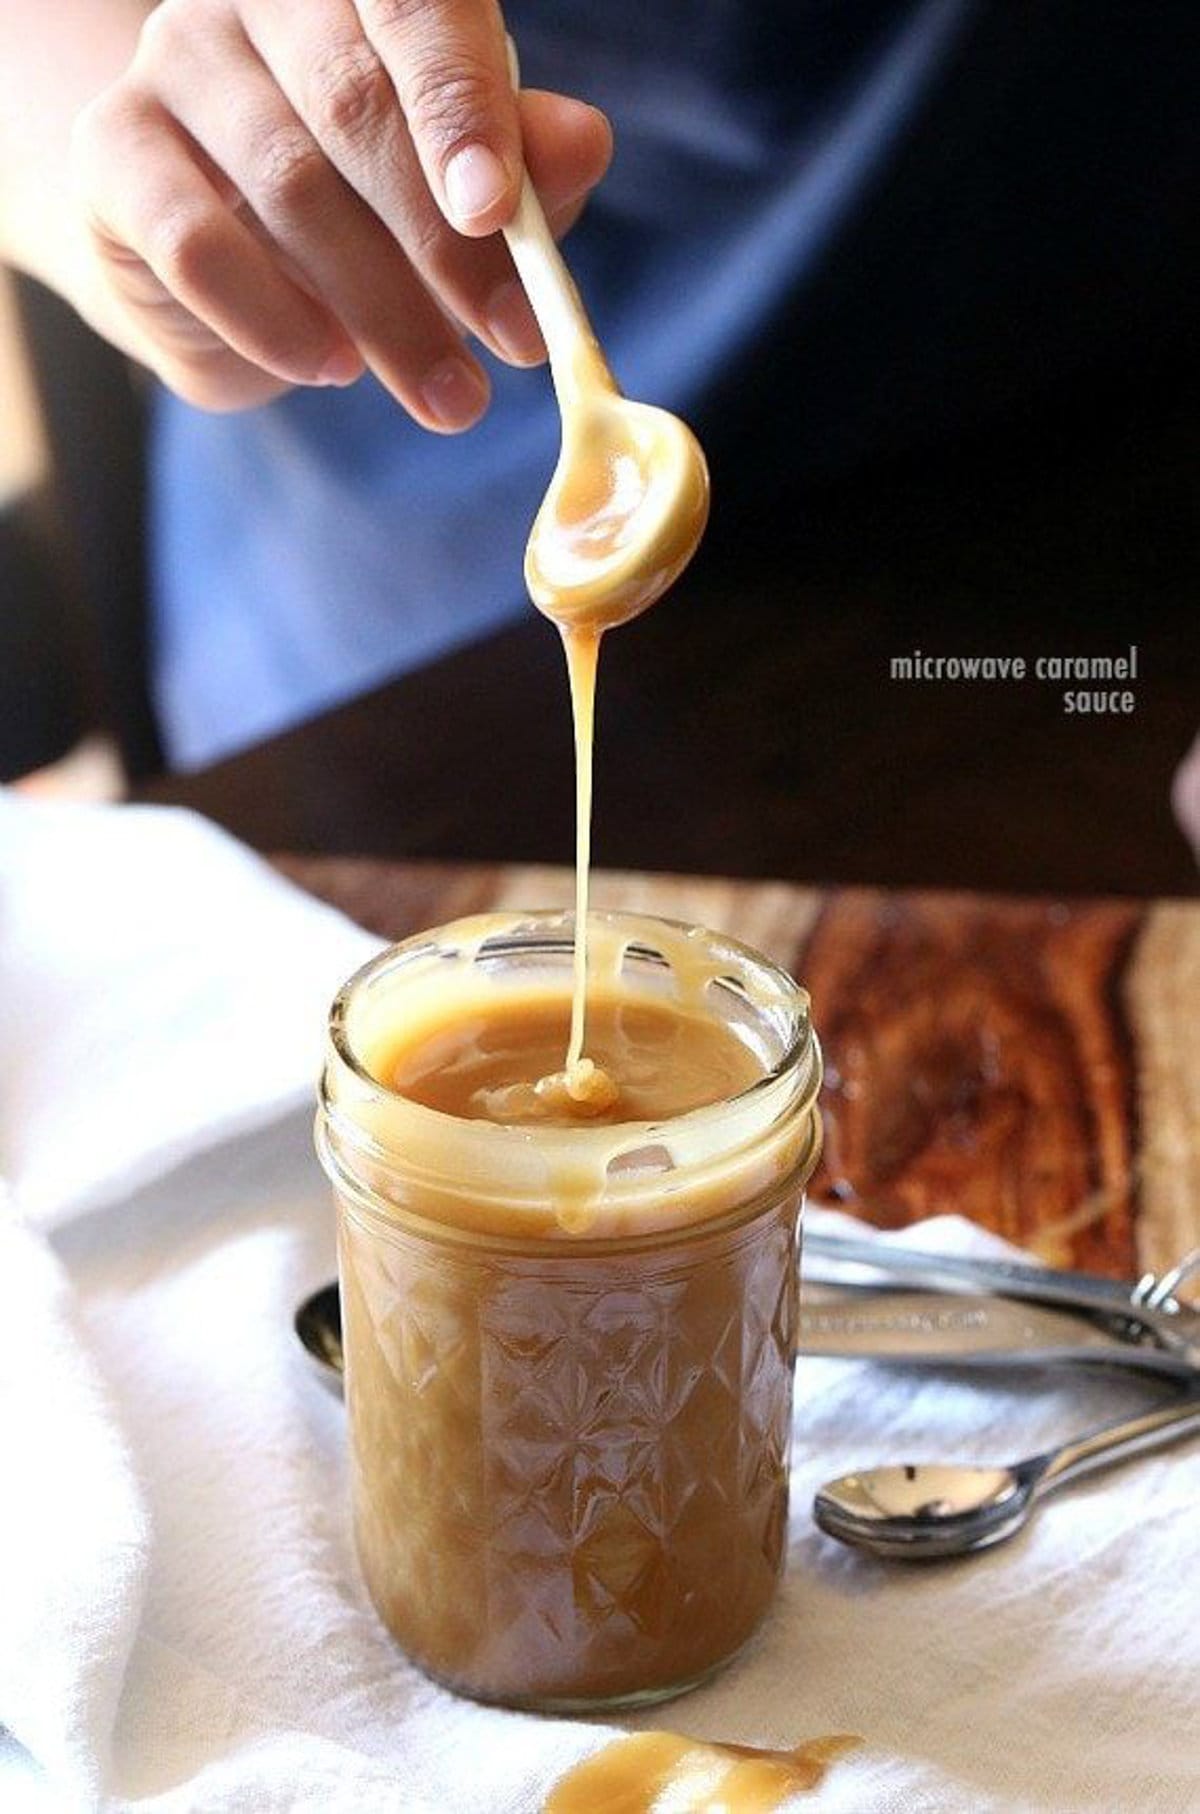 Making Caramel Sauce in the Microwave